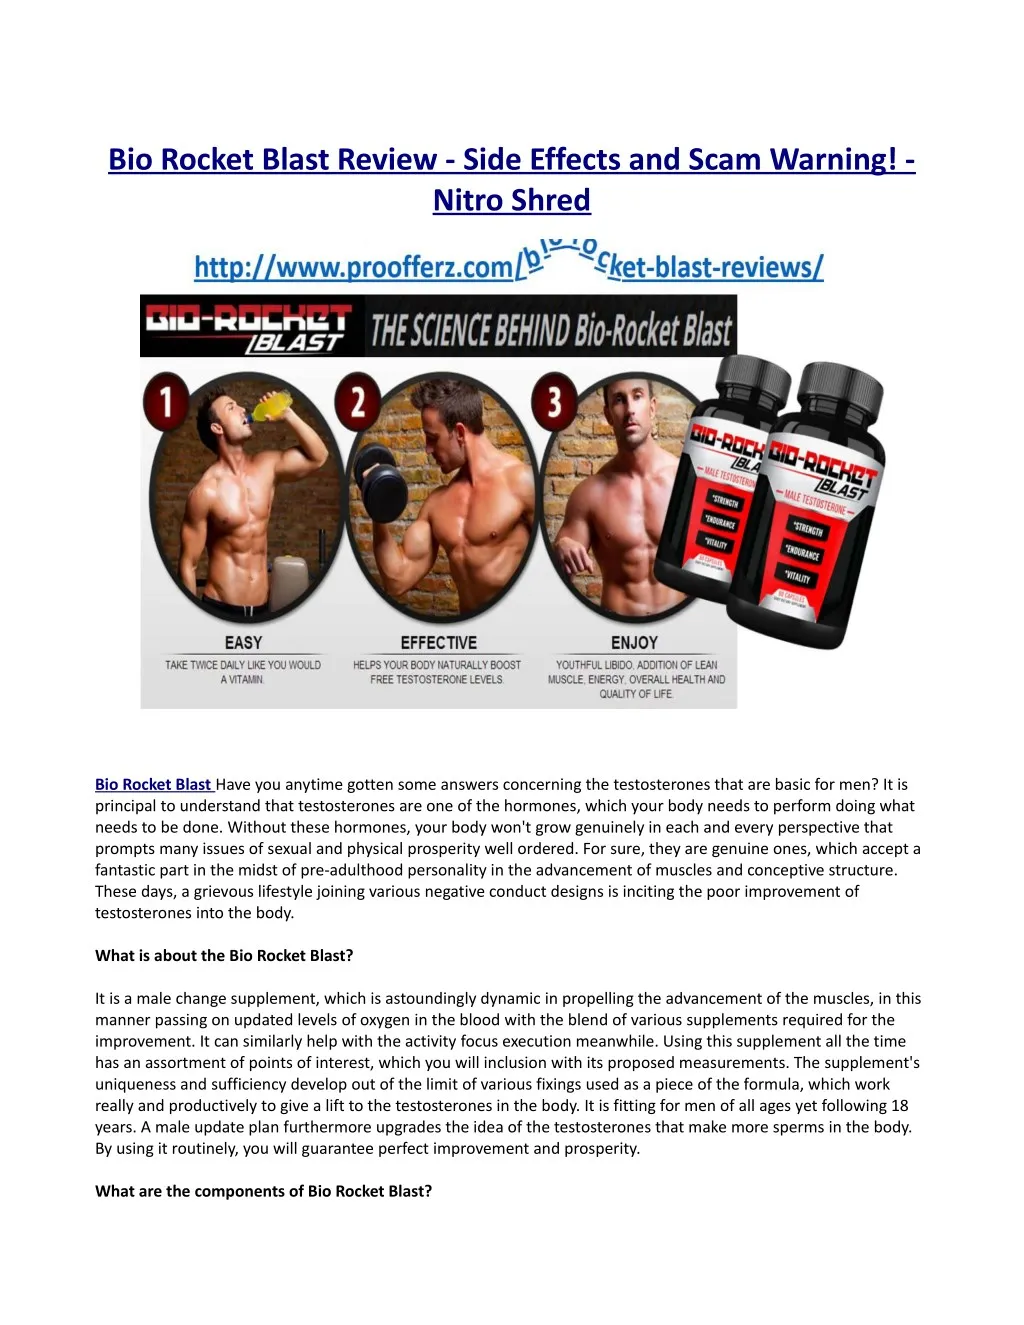 bio rocket blast review side effects and scam